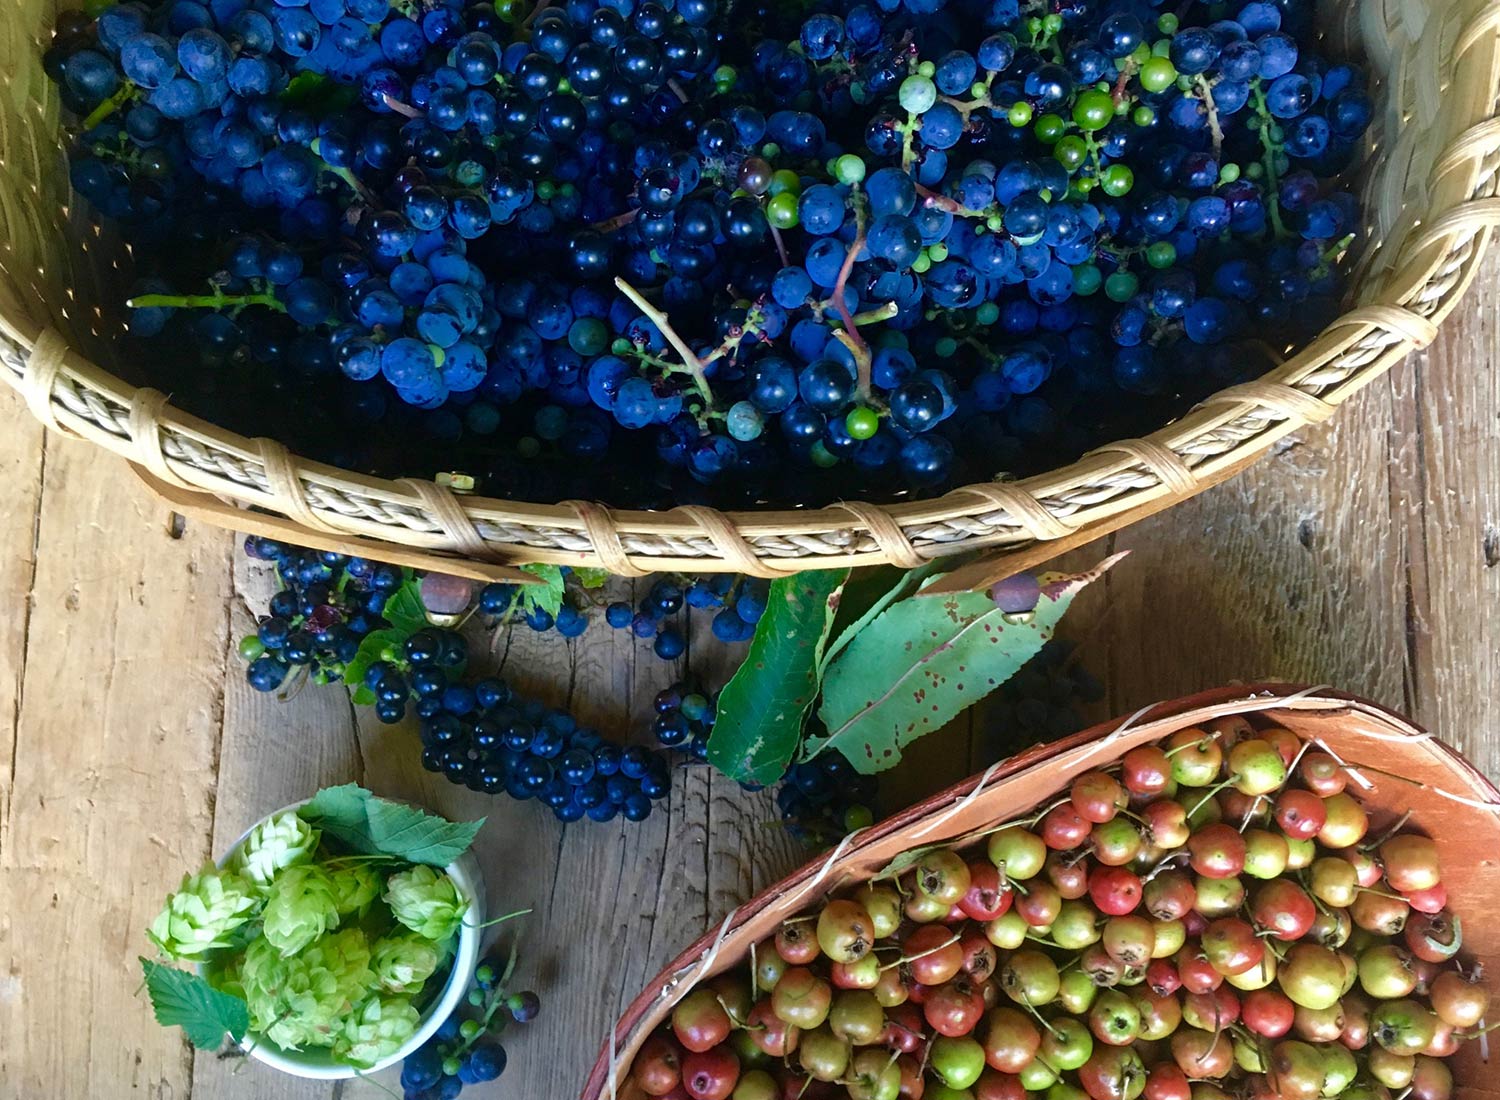 Food Lab at SHO: vegan gastronomy in a cold climate | wild grapes, hops & hawthorn berries all from the farm